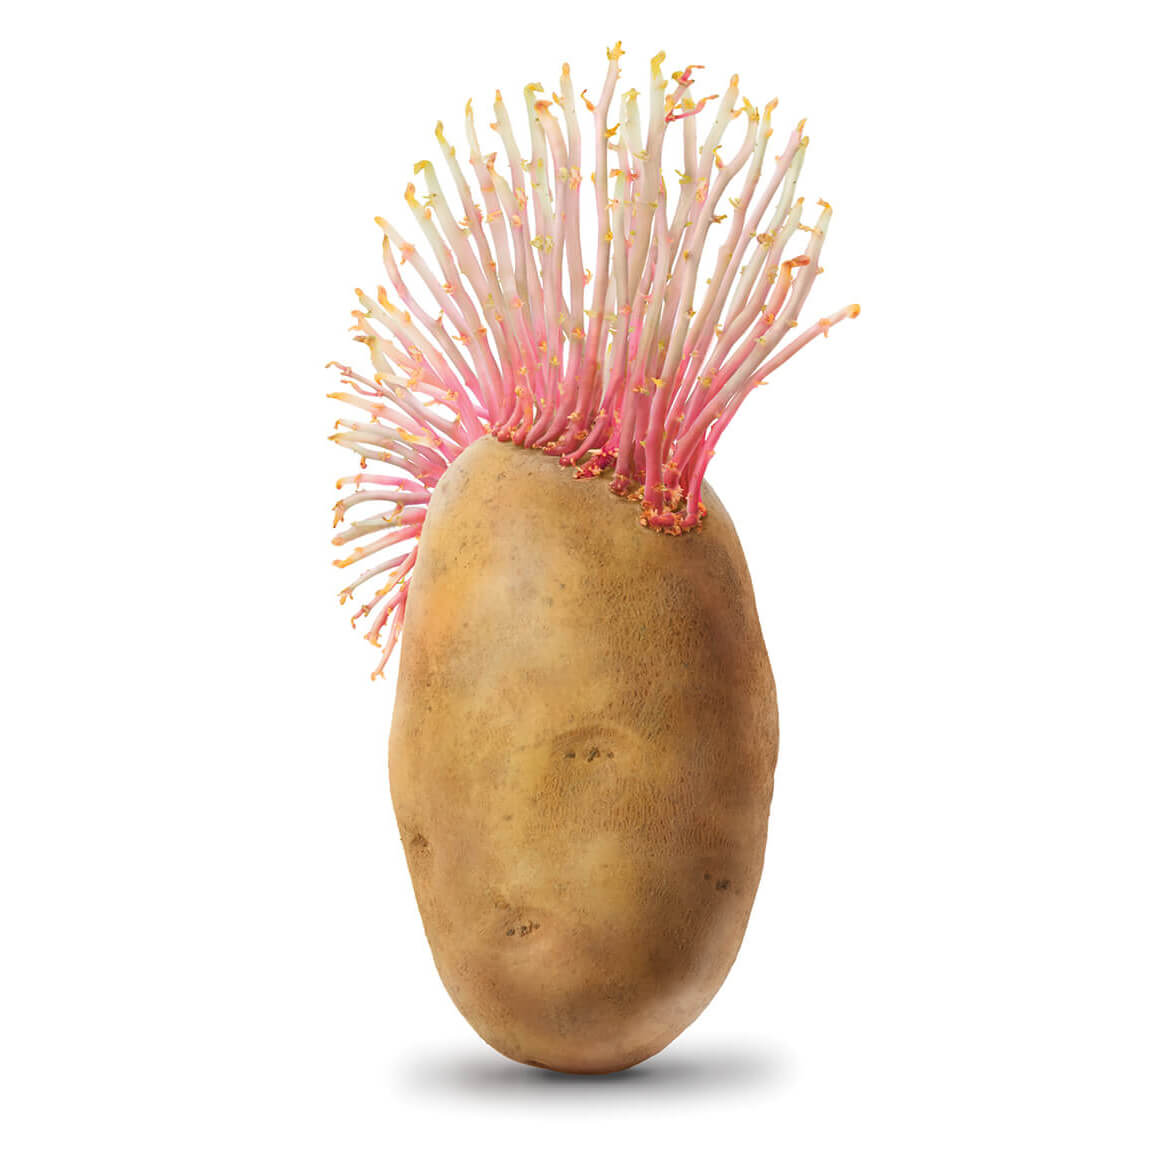 Amvac Smartblock, illustrations of a potato with roots shaped as a mohawk hairdo